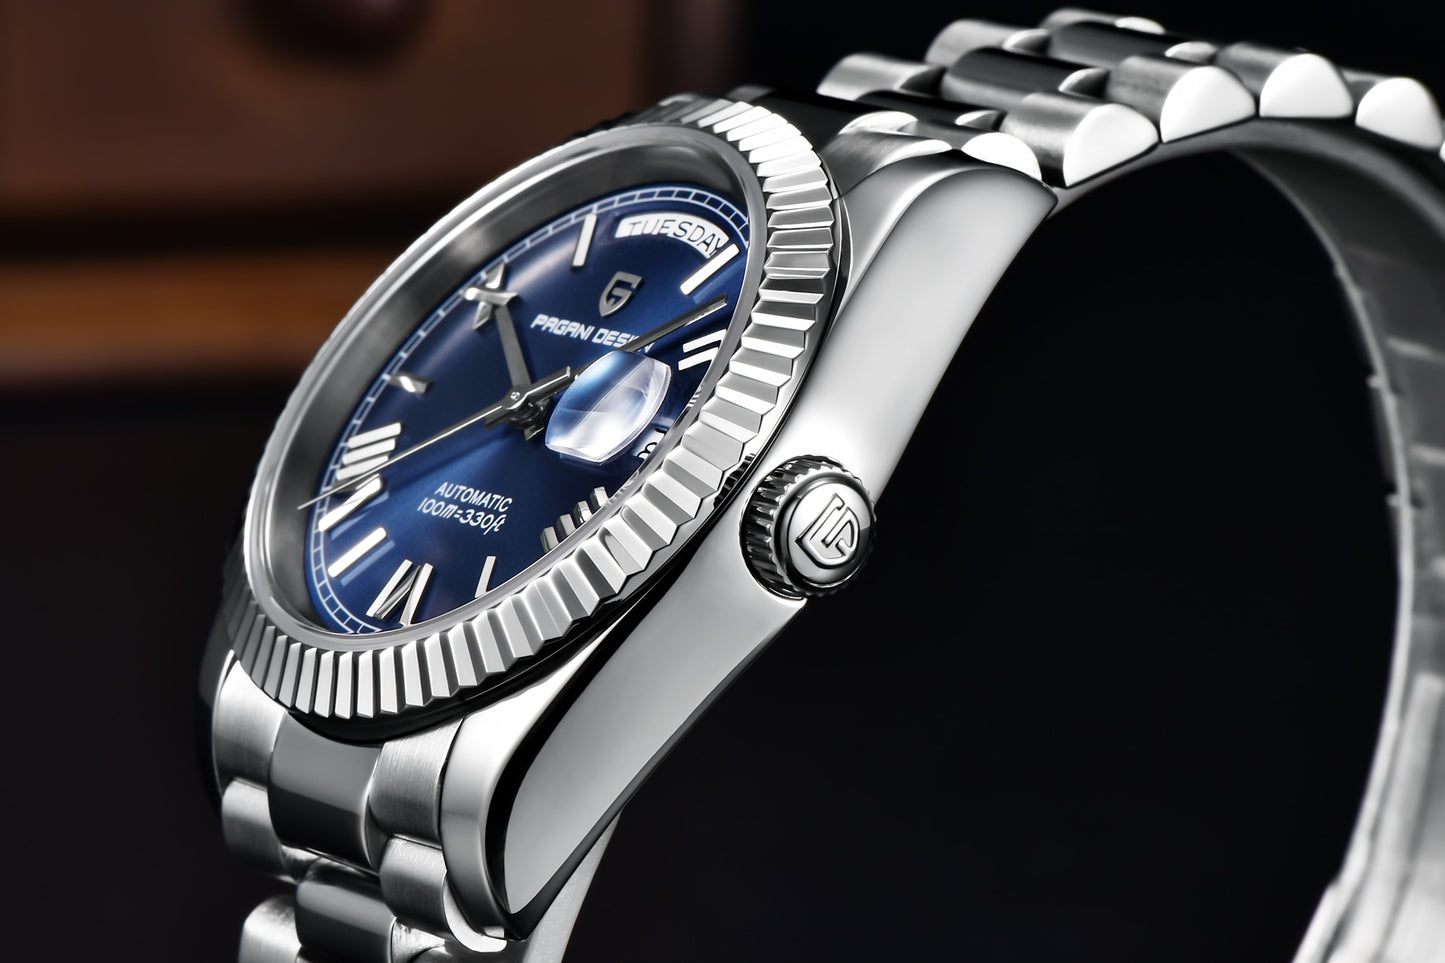 Exquisite DD36 Luxury Automatic Men's Watch with AR Sapphire Glass, Mechanical Precision, and 10Bar Water Resistance - Unveiling the ST16 Movement in the 2023 New Collection